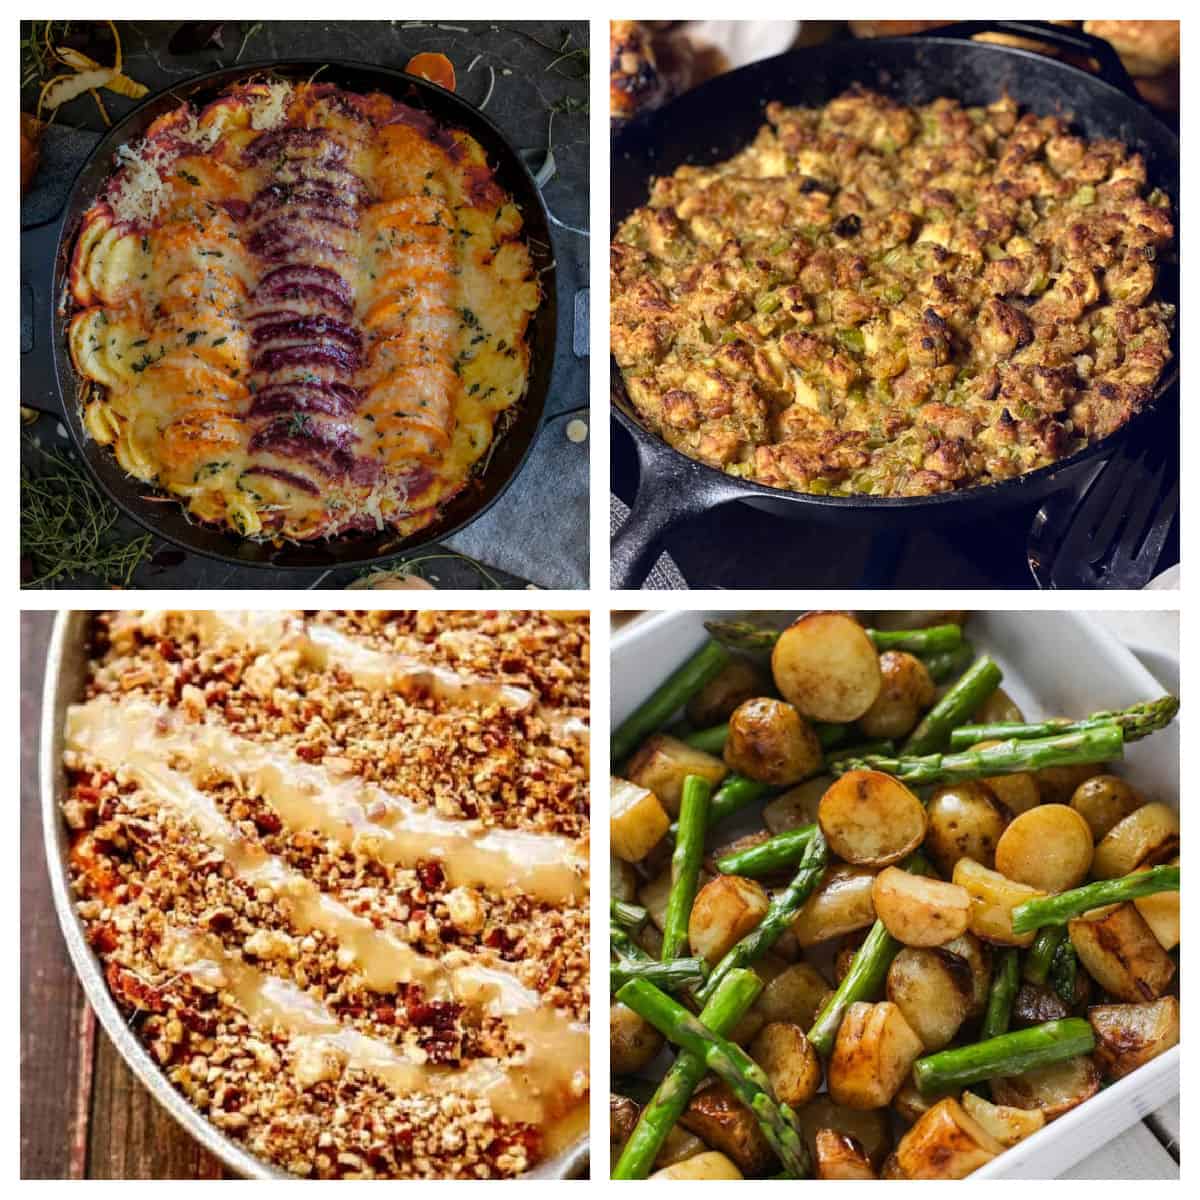 Roasted vegetables, stuffing, sweet potato casserole, green beans and potatoes in a collage.